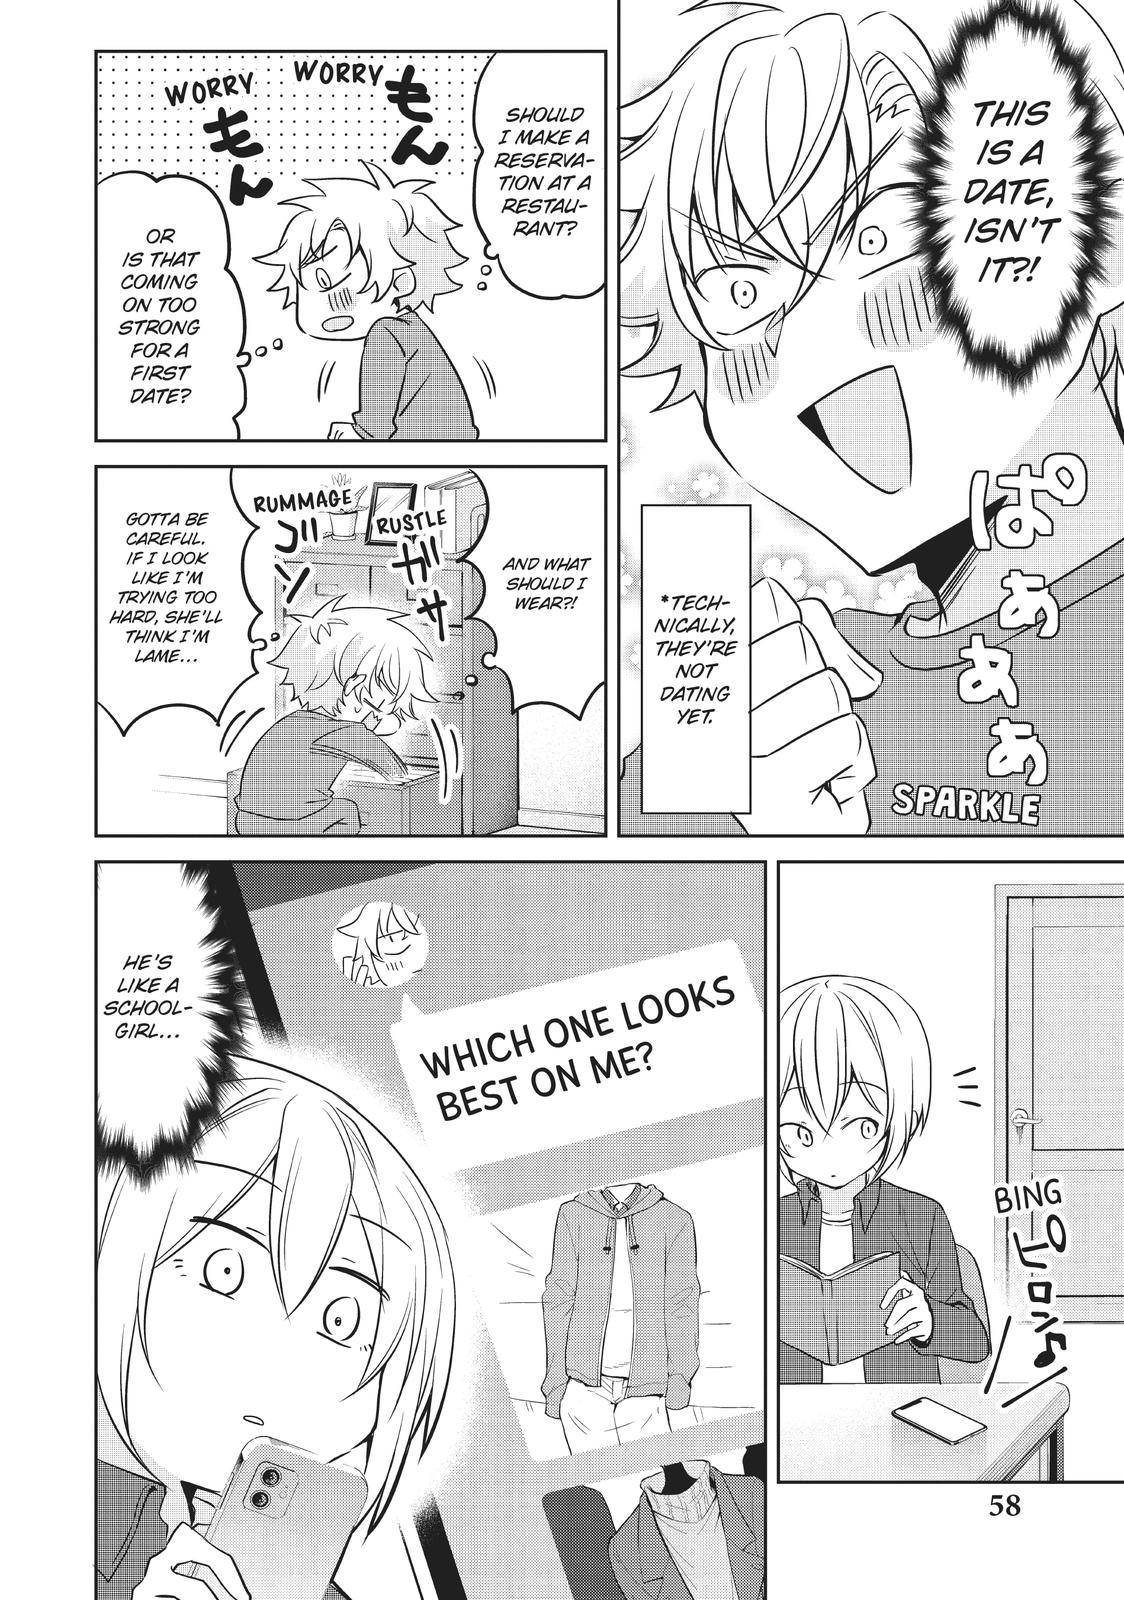 The Story Of The Girl I Like Being Too Ikemen - chapter 20 - #2